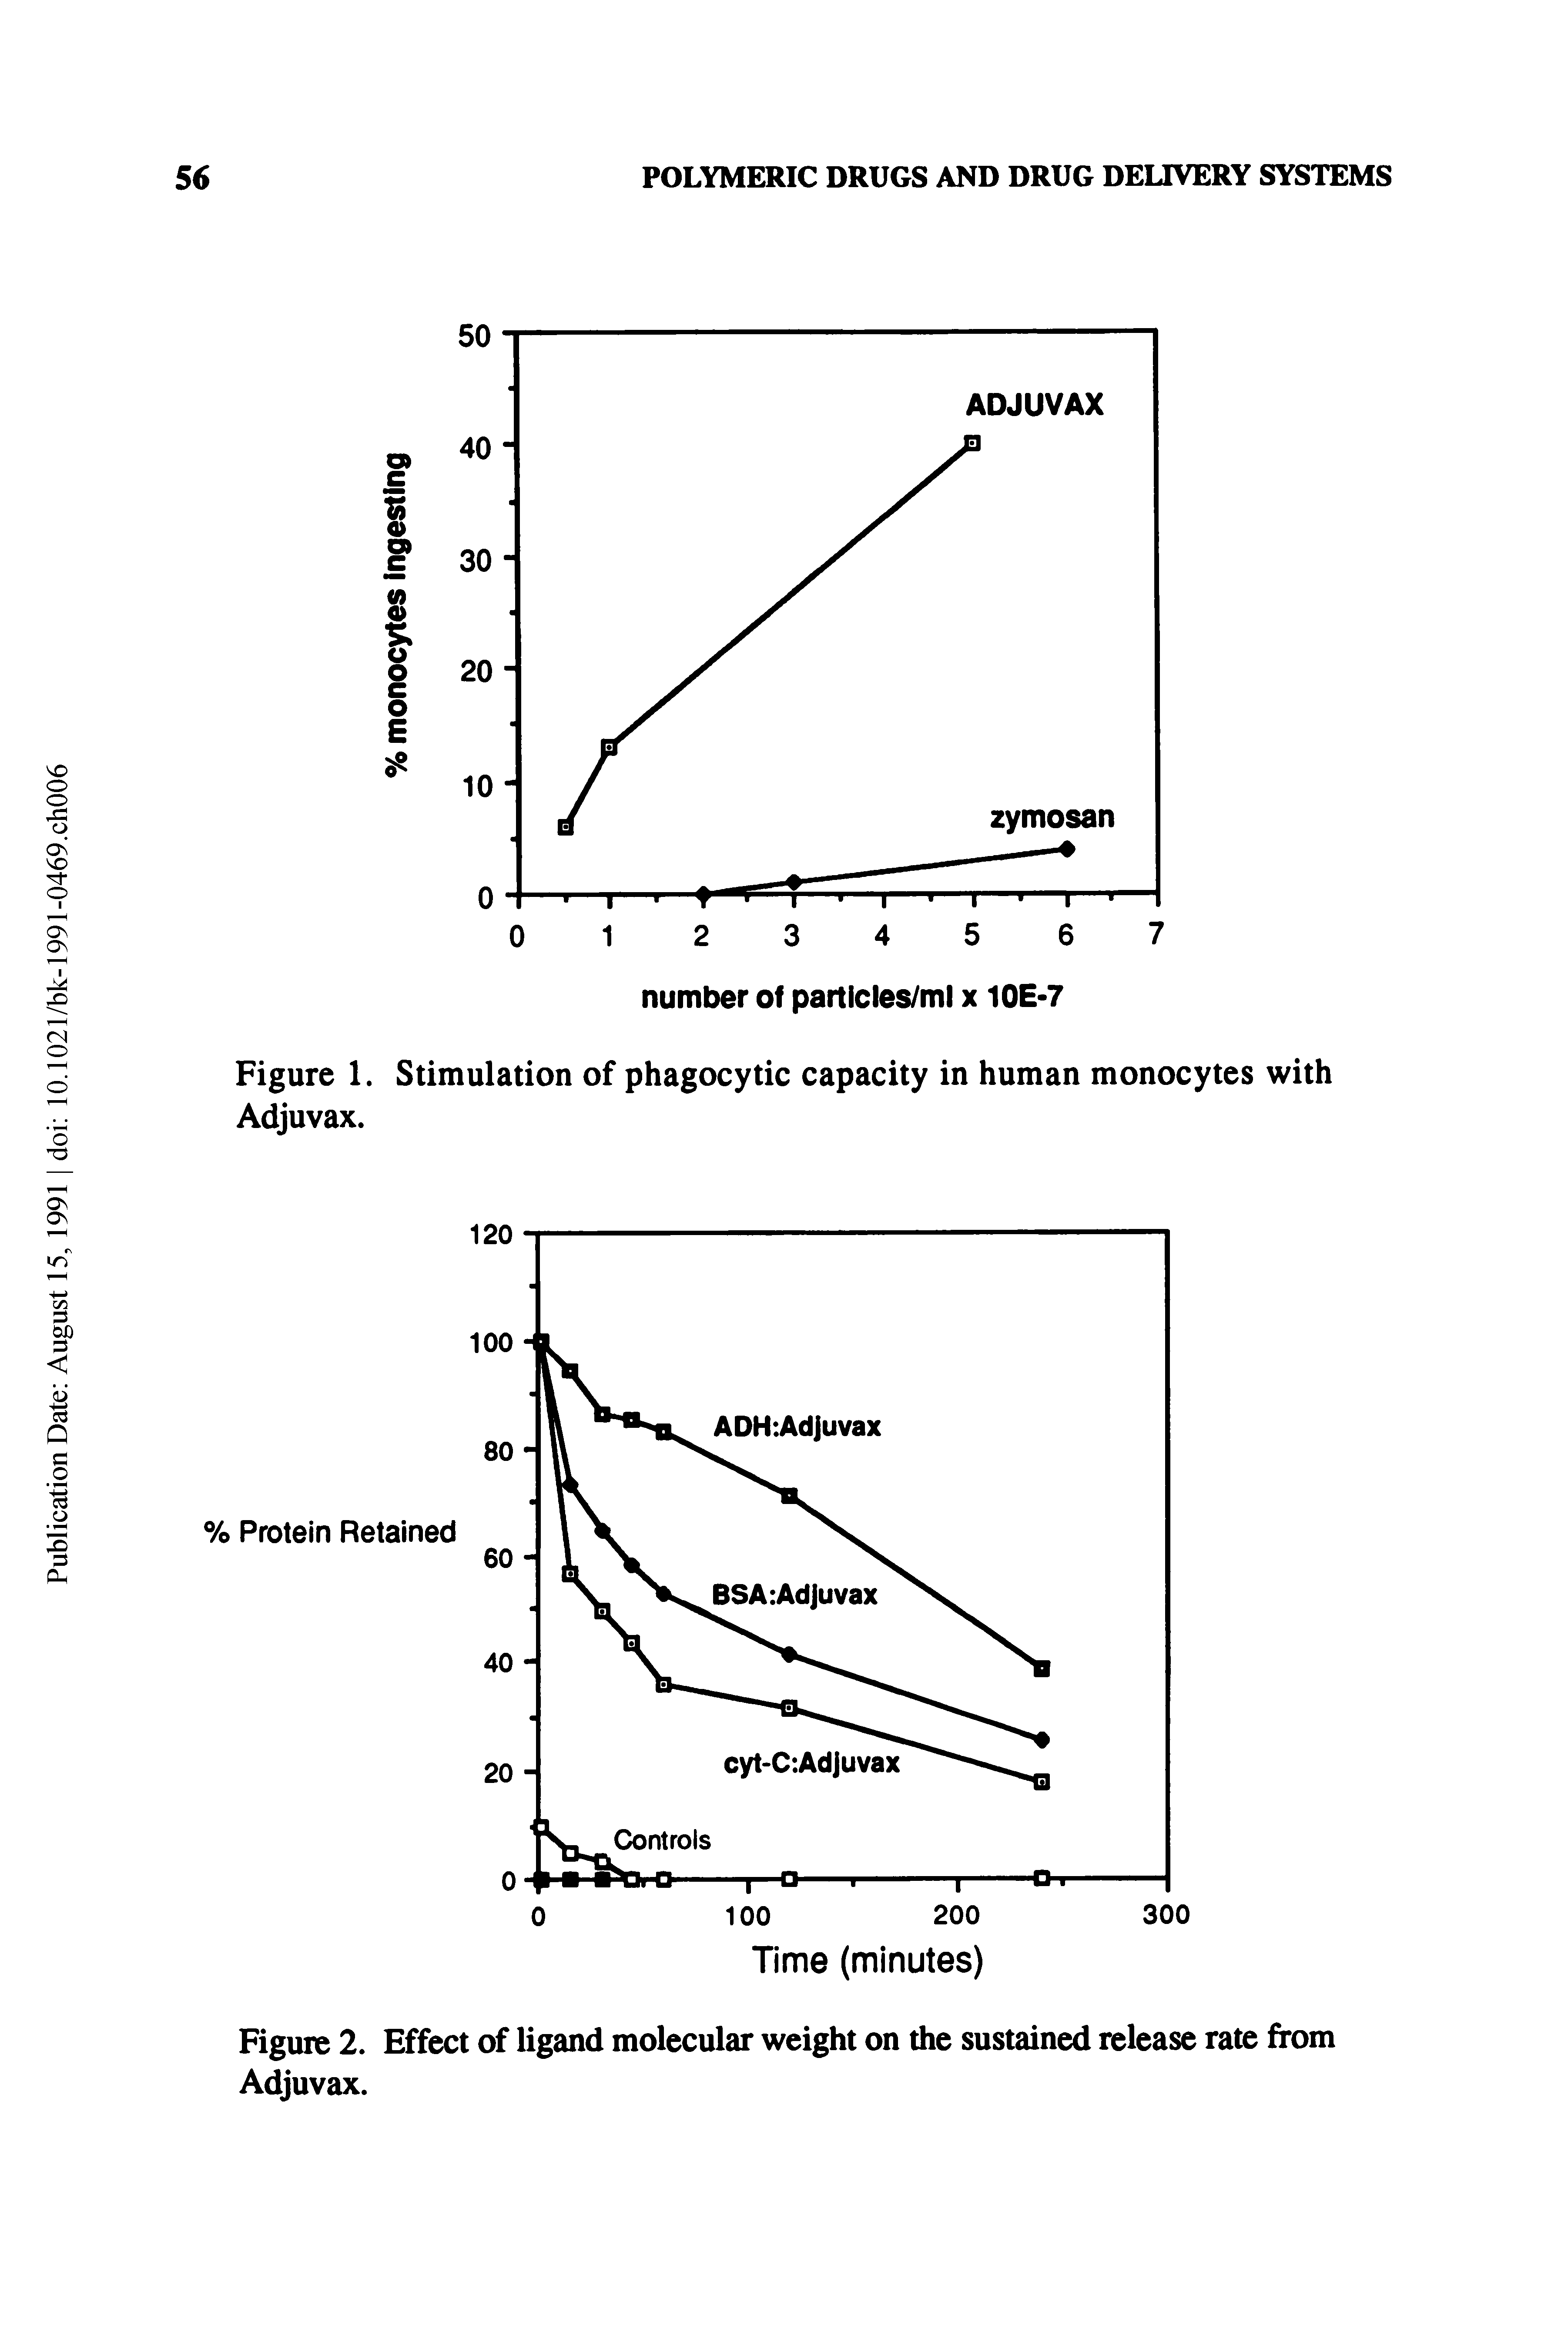 Figure 2. Effect of ligand molecular weight on the sustained release rate from Adjuvax.